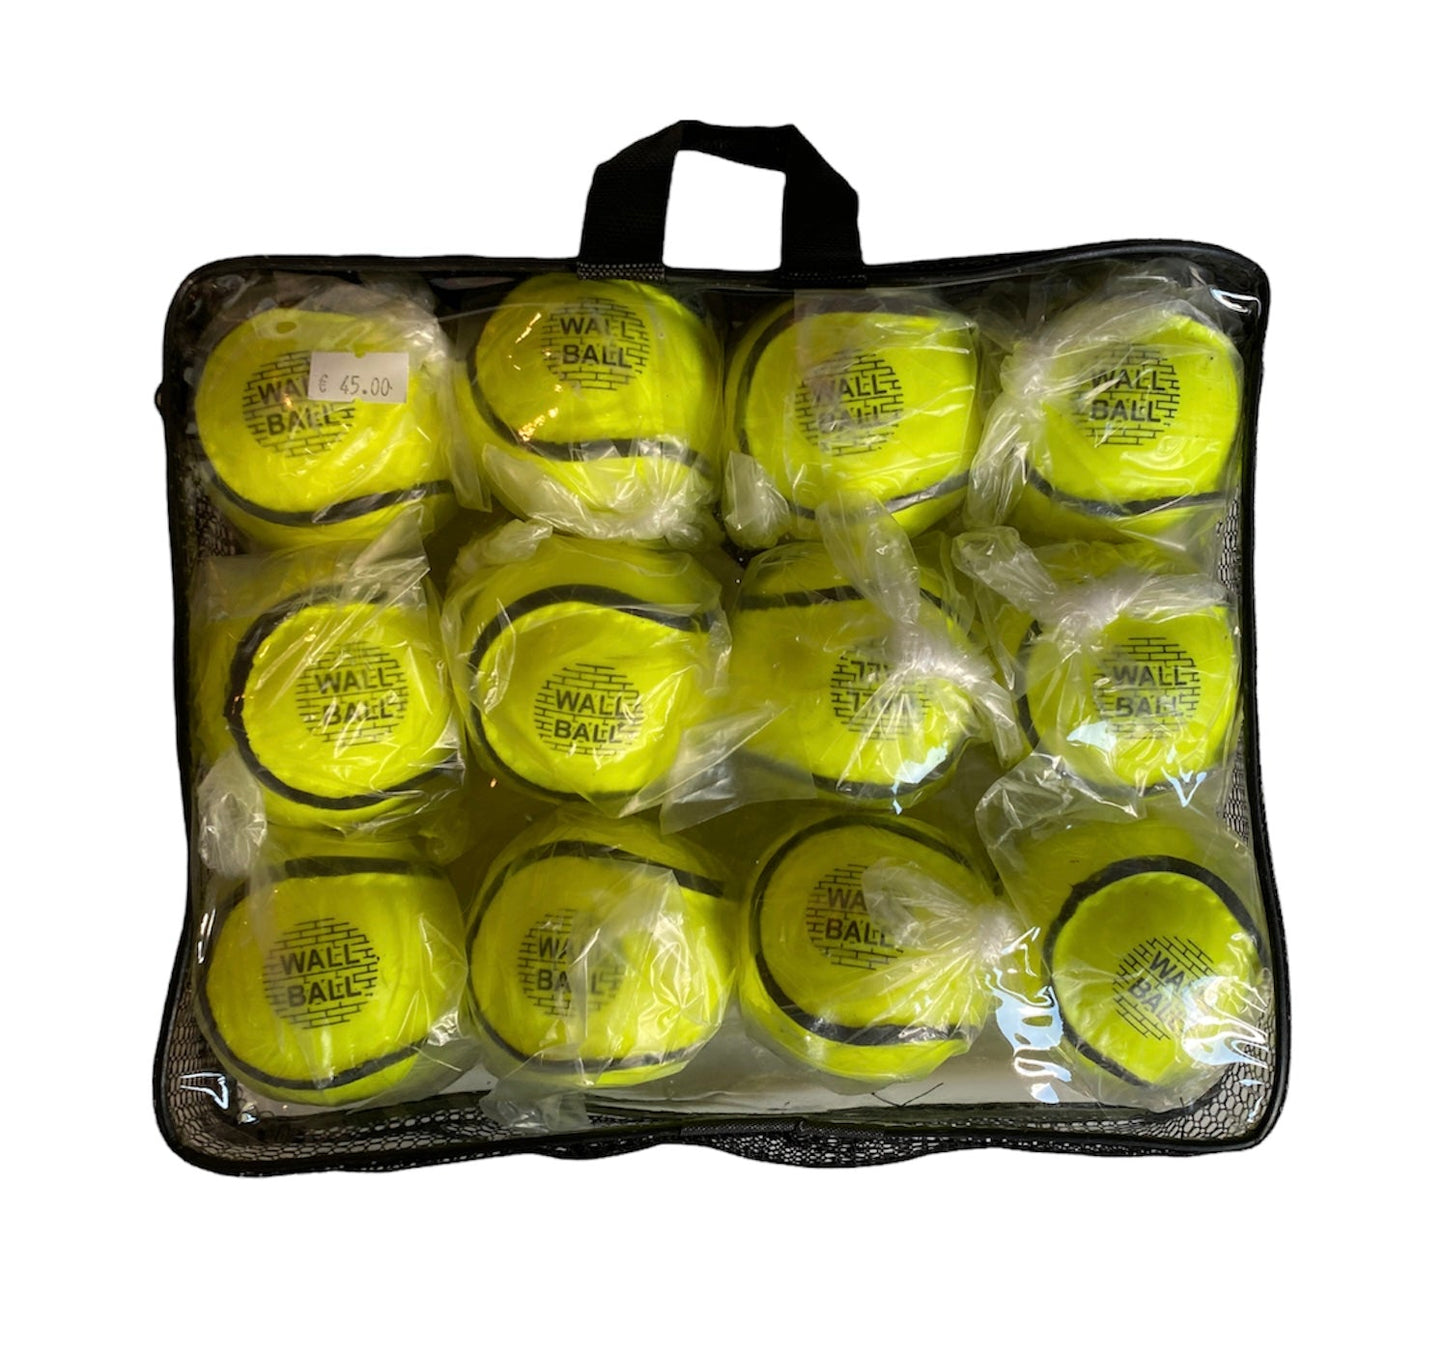 PREMIER SPORTS - WALL BALL YELLOW (SIZE 4) Bag of 12